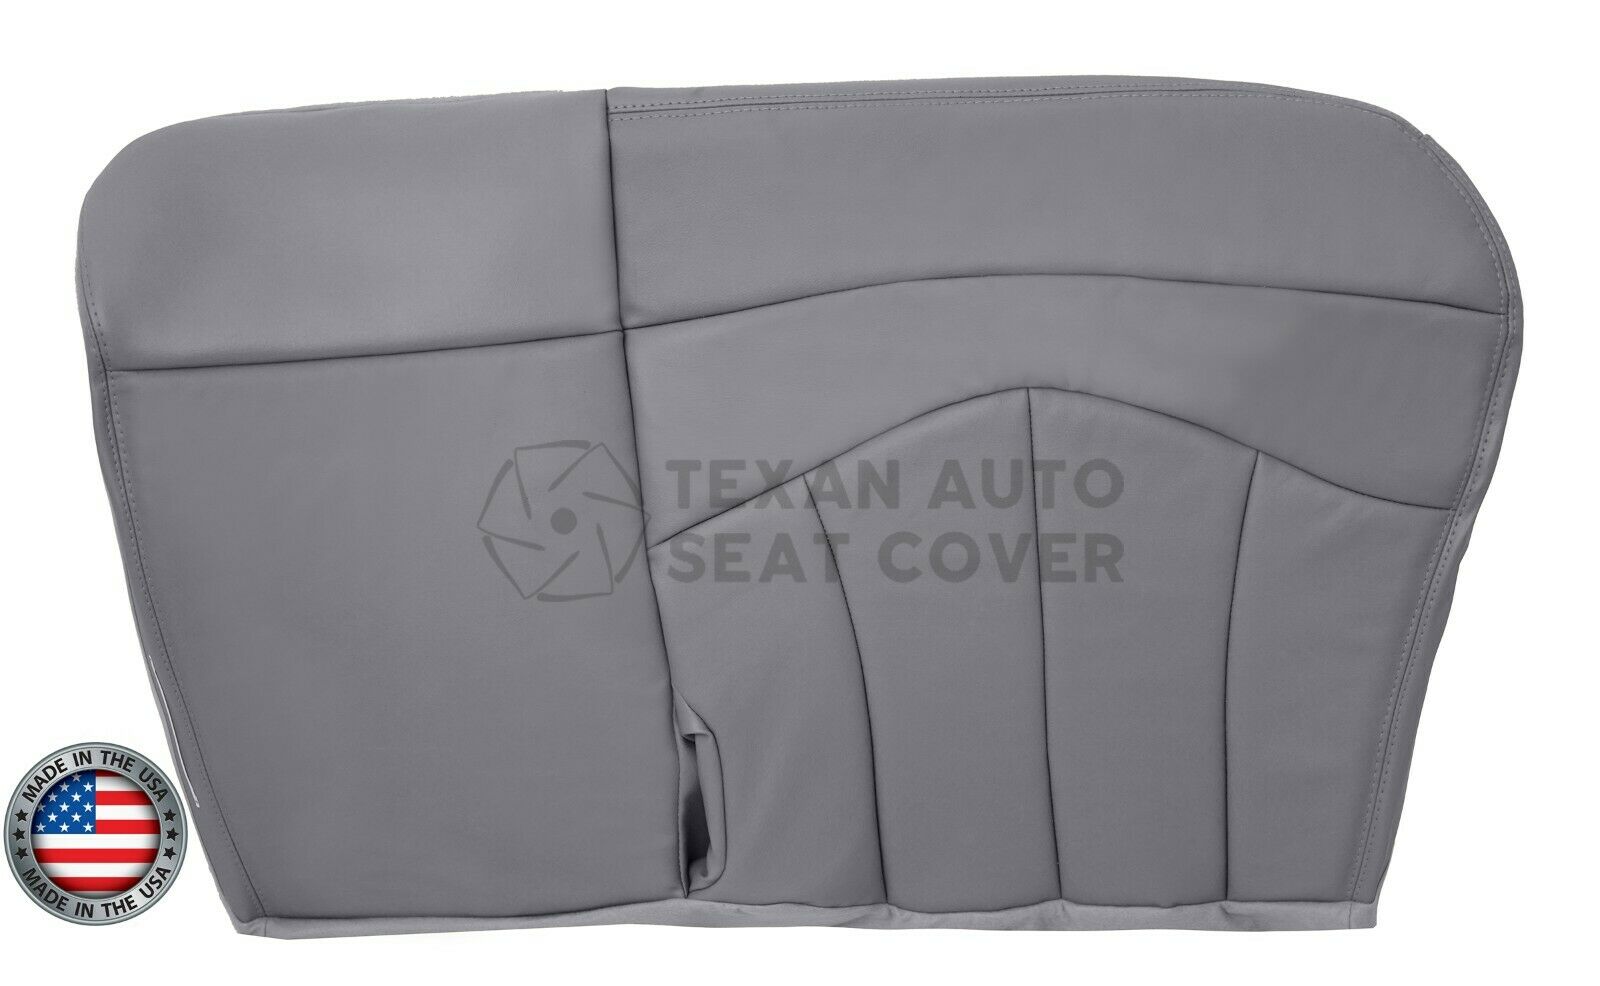 1999, 2000, 2001 Ford F150 Lariat Passenger Bench Leather Seat Cover Gray 60/40